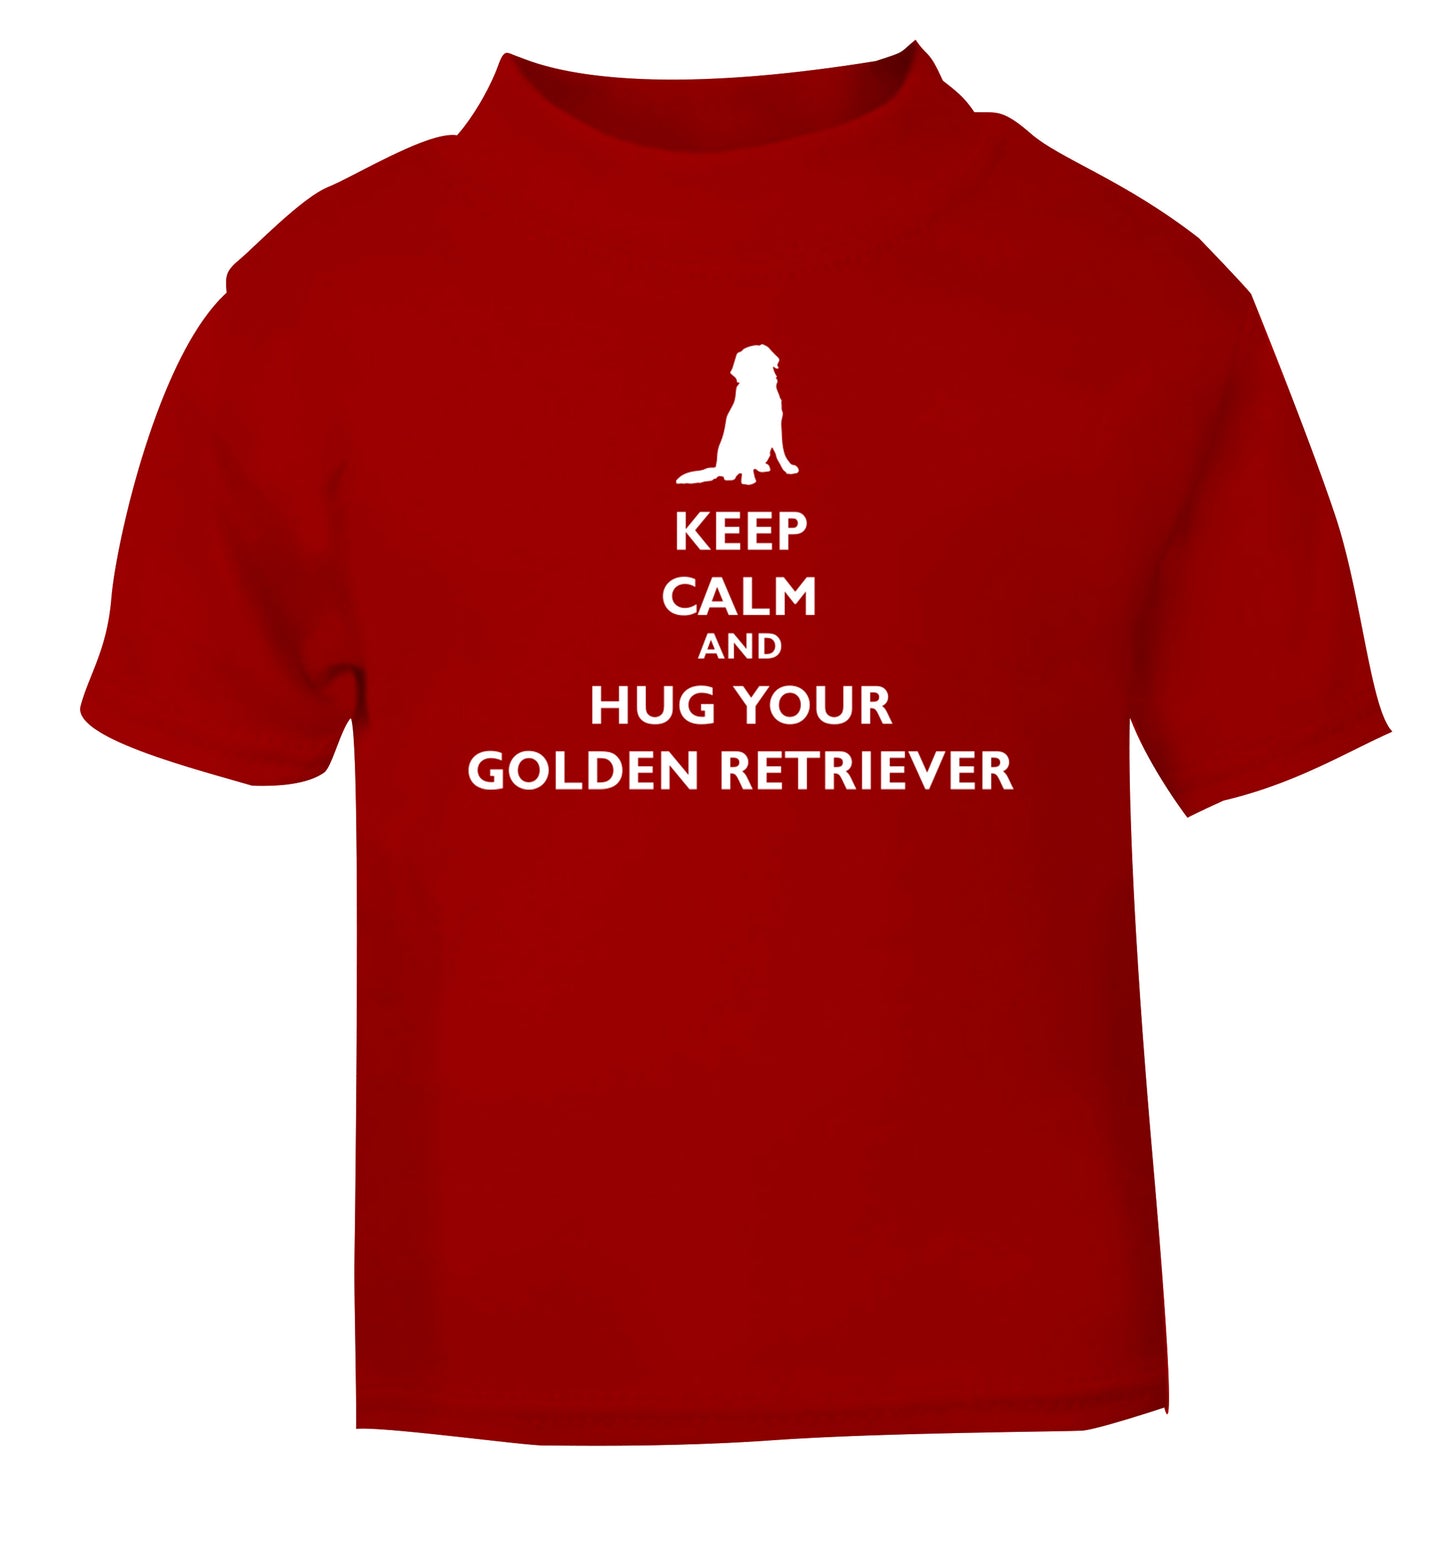 Keep calm and hug your golden retriever red Baby Toddler Tshirt 2 Years